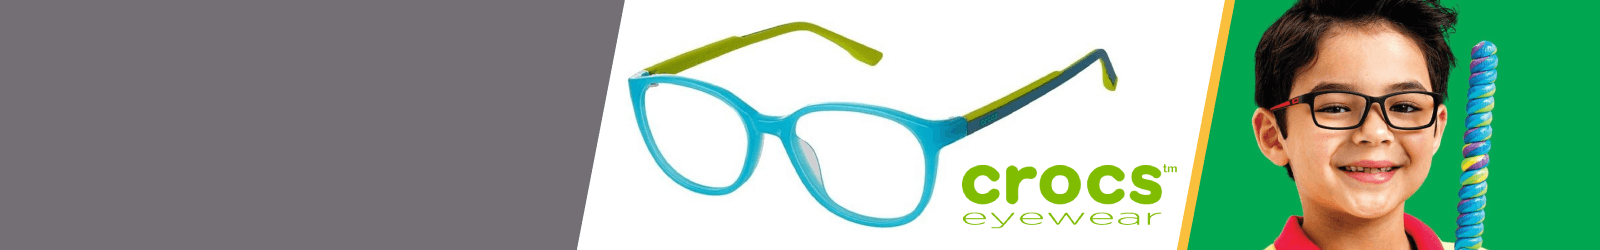 Indigo Crocs  Kids Glasses from 4 to 6-year-old